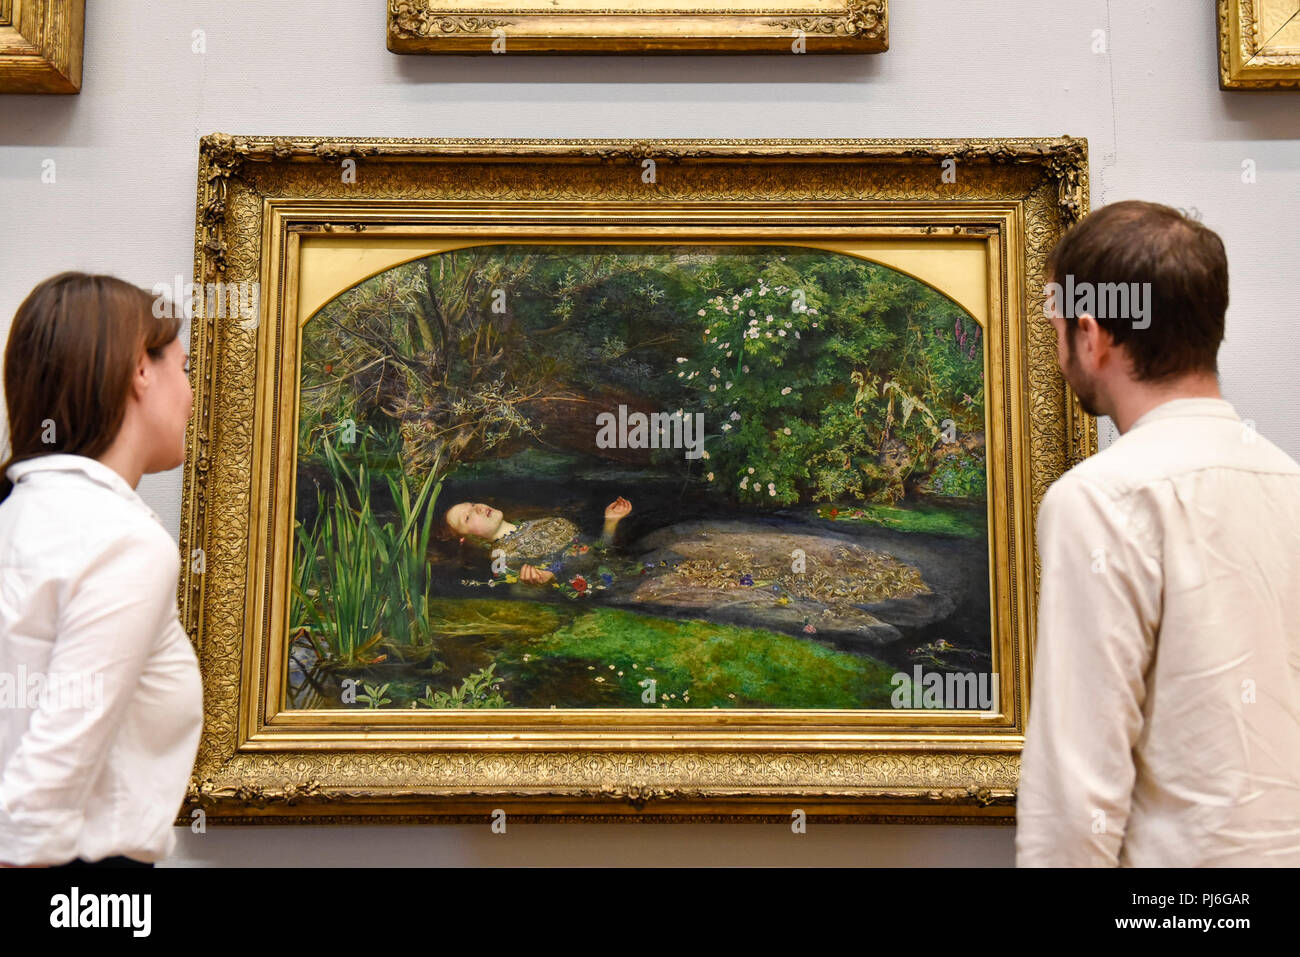 London, UK.  5 September 2018.  Staff members view 'Ophelia', 1851-52, by John Everett Millais, at Tate Britain, to mark the launch of a major new exhibition at the National Gallery of Australia (NGA) in December 2018.  Over forty Pre-Raphaelite works will be loaned by Tate to NGA, which have never been shown in Australia until now, including 'Ophelia', 1851-52, by John Everett Millais and 'The Lady of Shalott', 1888, by John William Waterhouse. Credit: Stephen Chung / Alamy Live News Stock Photo